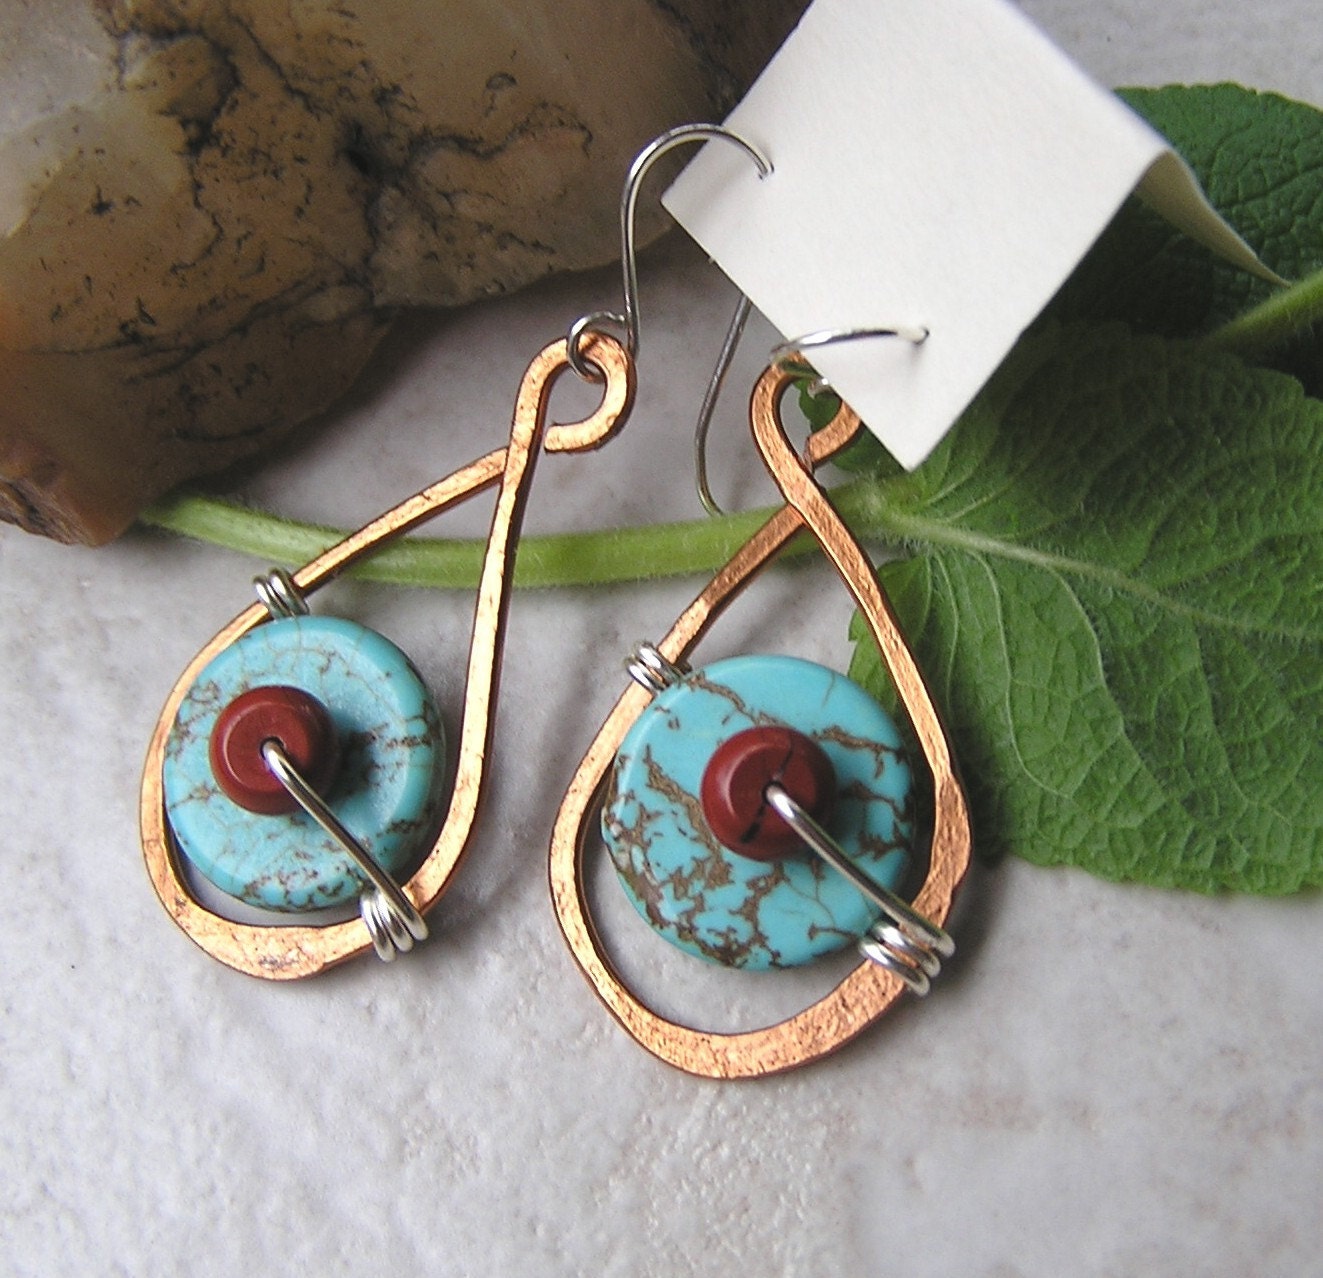 Desert Country hammered copper earrings with turquoise and red jasper